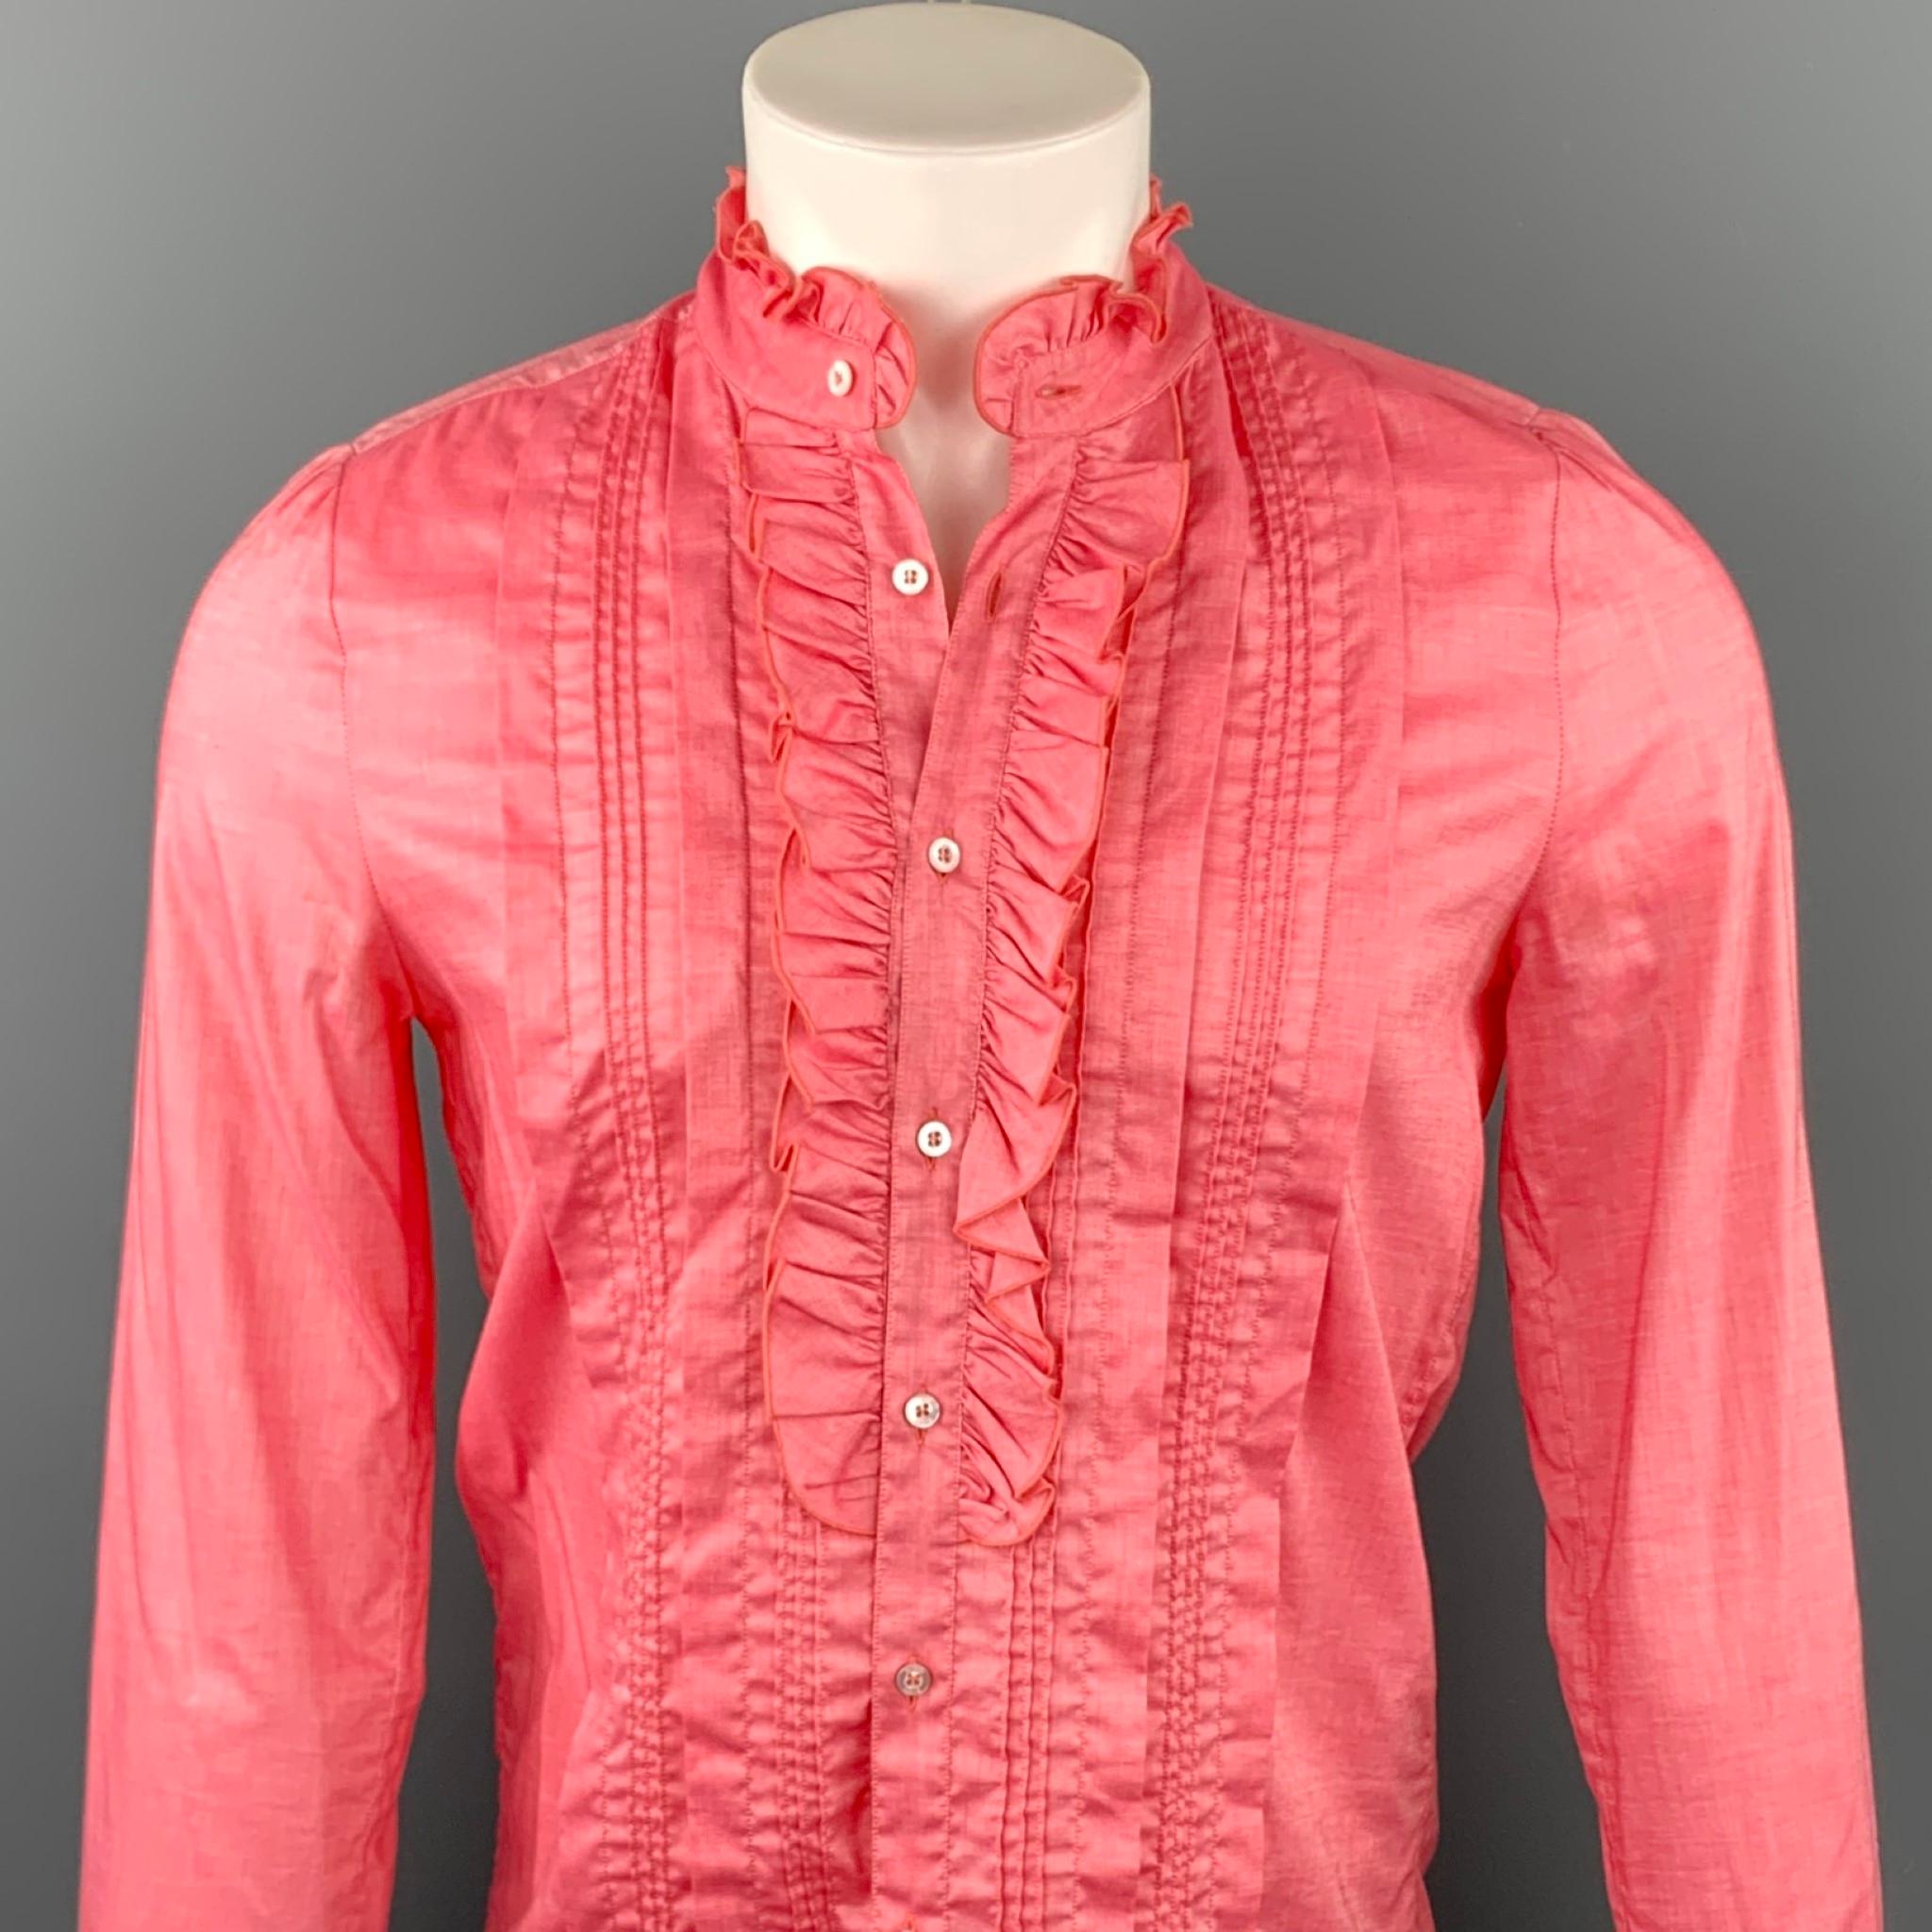 GUCCI long sleeve shirt comes in a coral cotton / viscose featuring a front pleat design, ruffled, and a button up closure. Made in Italy. 

New With Tags.
Marked: S

Measurements:

Shoulder: 15.5 in. 
Chest: 38 in. 
Sleeve: 27 in. 
Length: 25 in. 